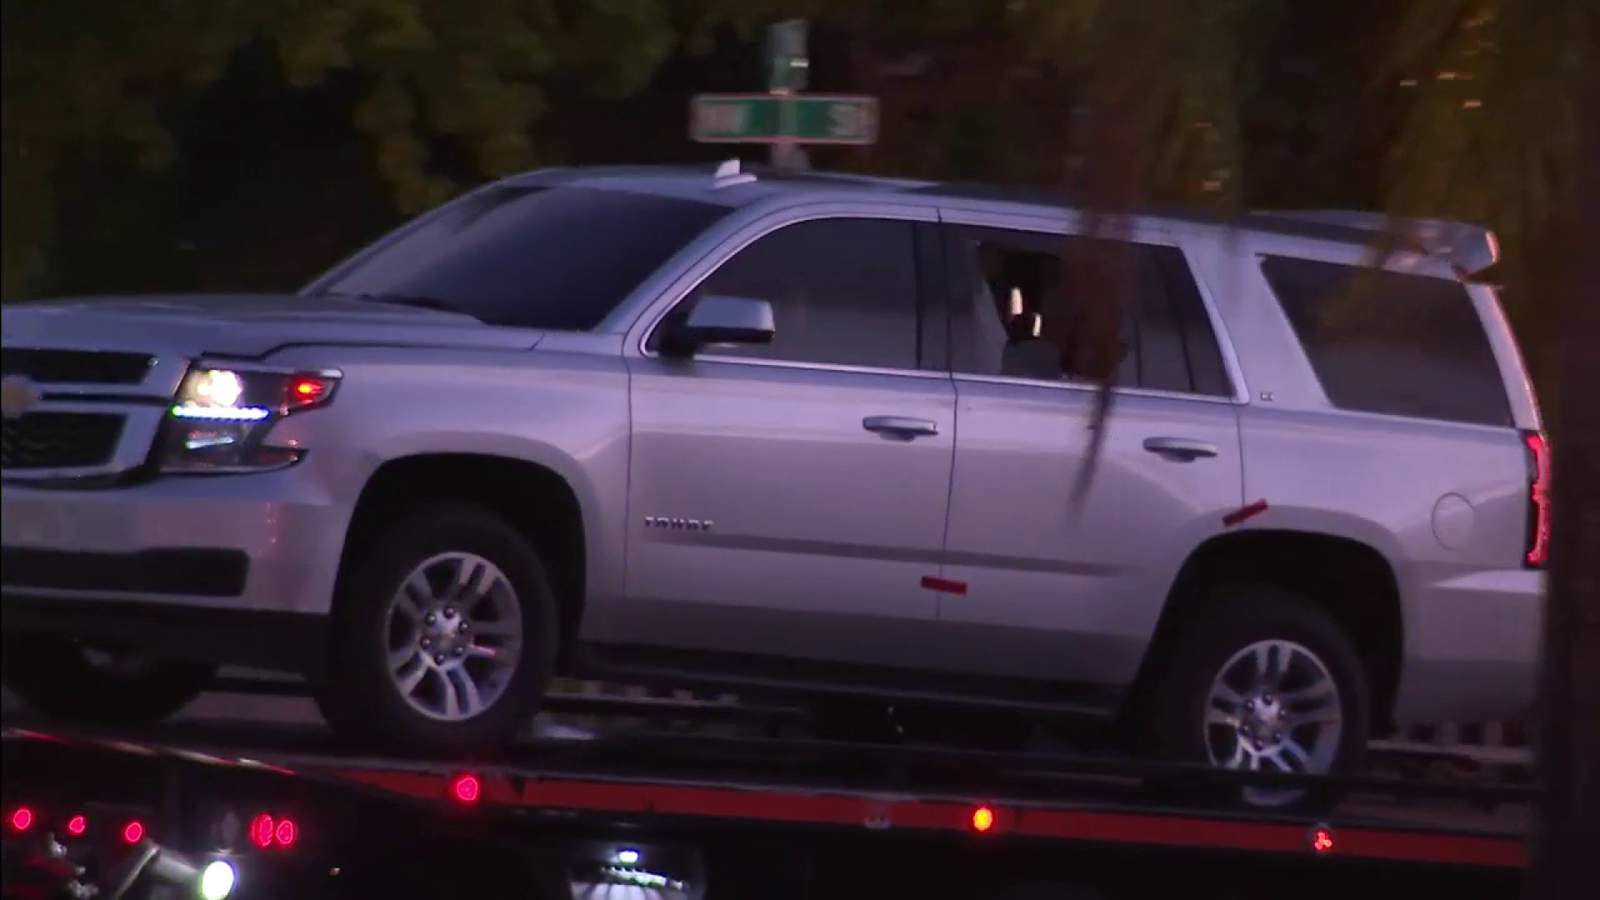 Man killed in Hallandale Beach shooting where SUV riddled with bullets